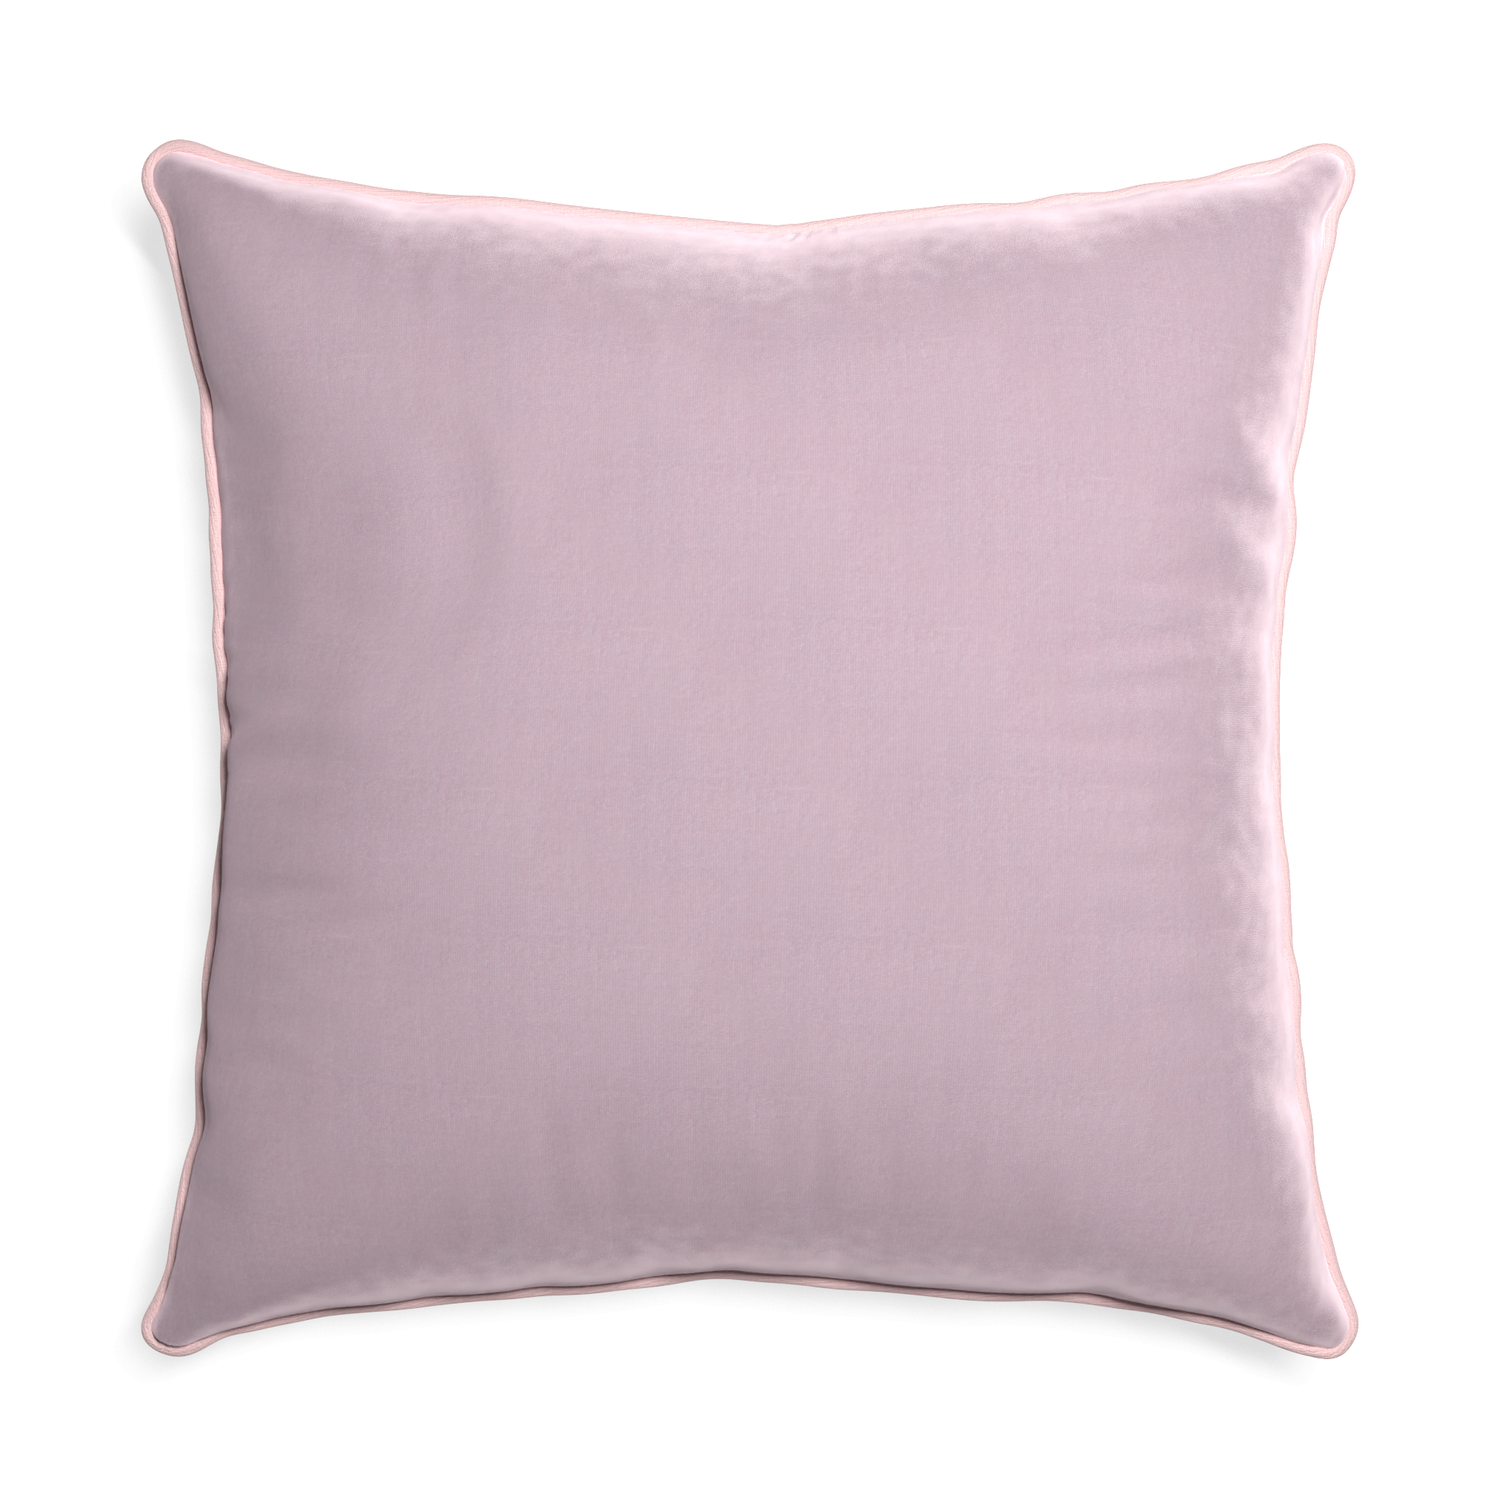 Euro-sham lilac velvet custom lilacpillow with petal piping on white background